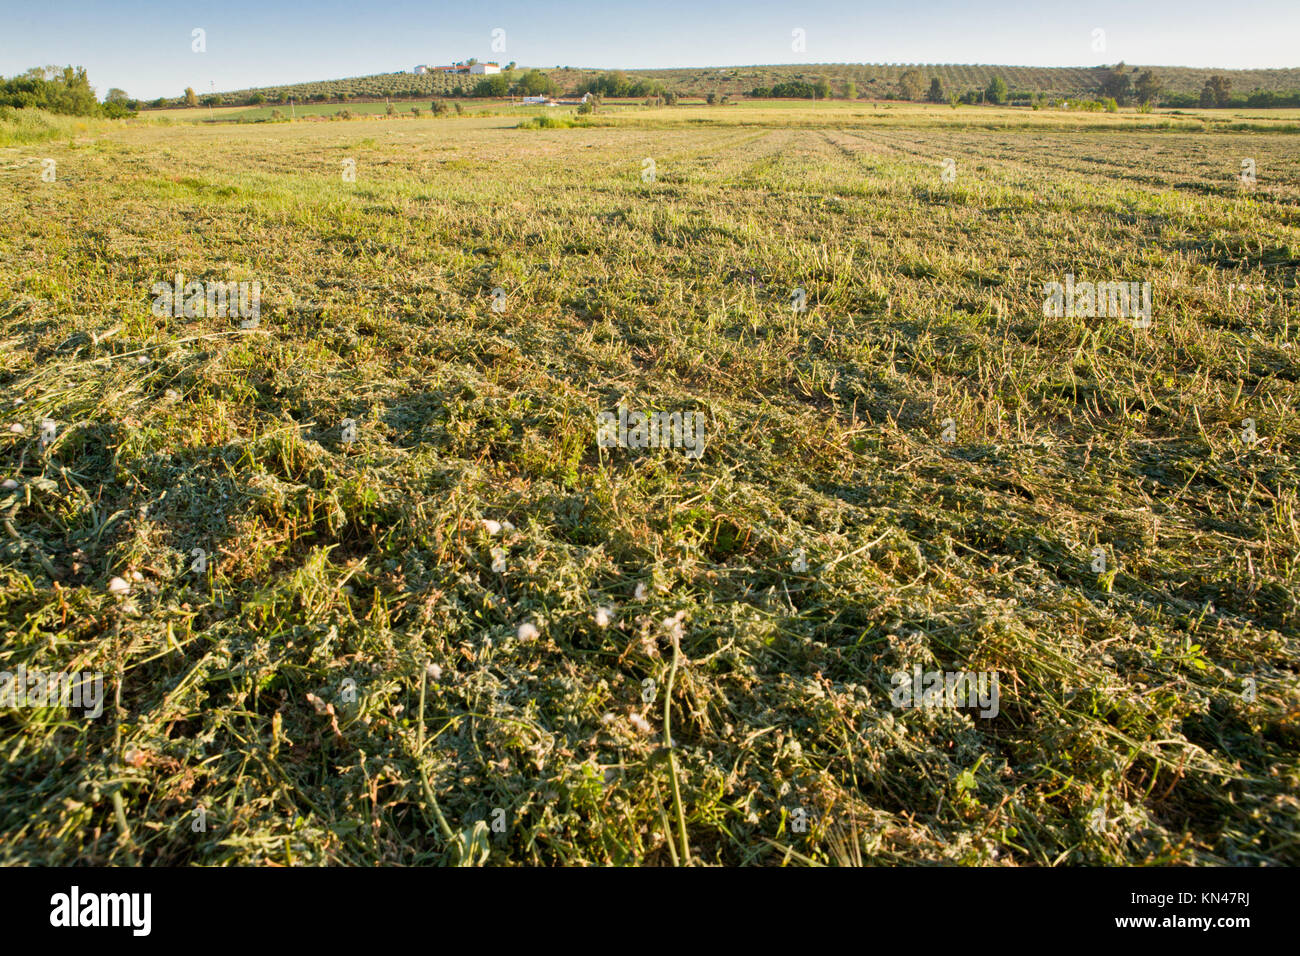 A view of an alfalfa field just cut, Extremadura, Spain. Stock Photo